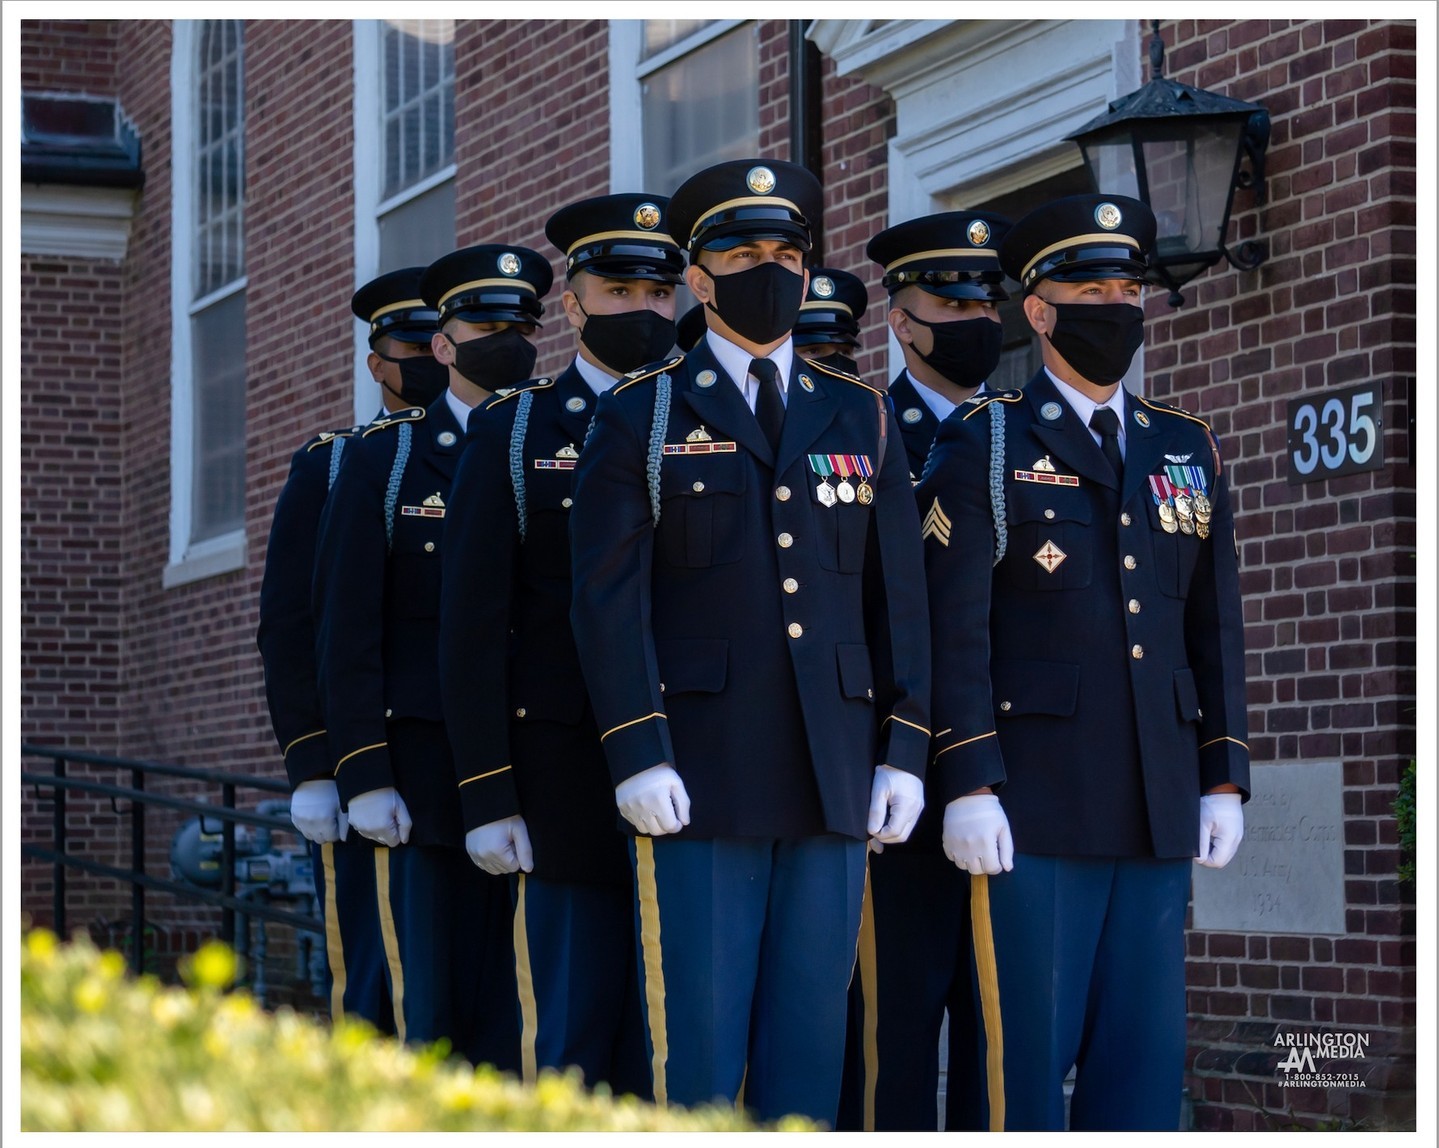 Soldiers stand outside of The Old Post Chapel at Fort Myer, adjoining Arlington National Cemetery in preparation for the service of an honored veteran.

Image captured by our @arlingtonmedia team.